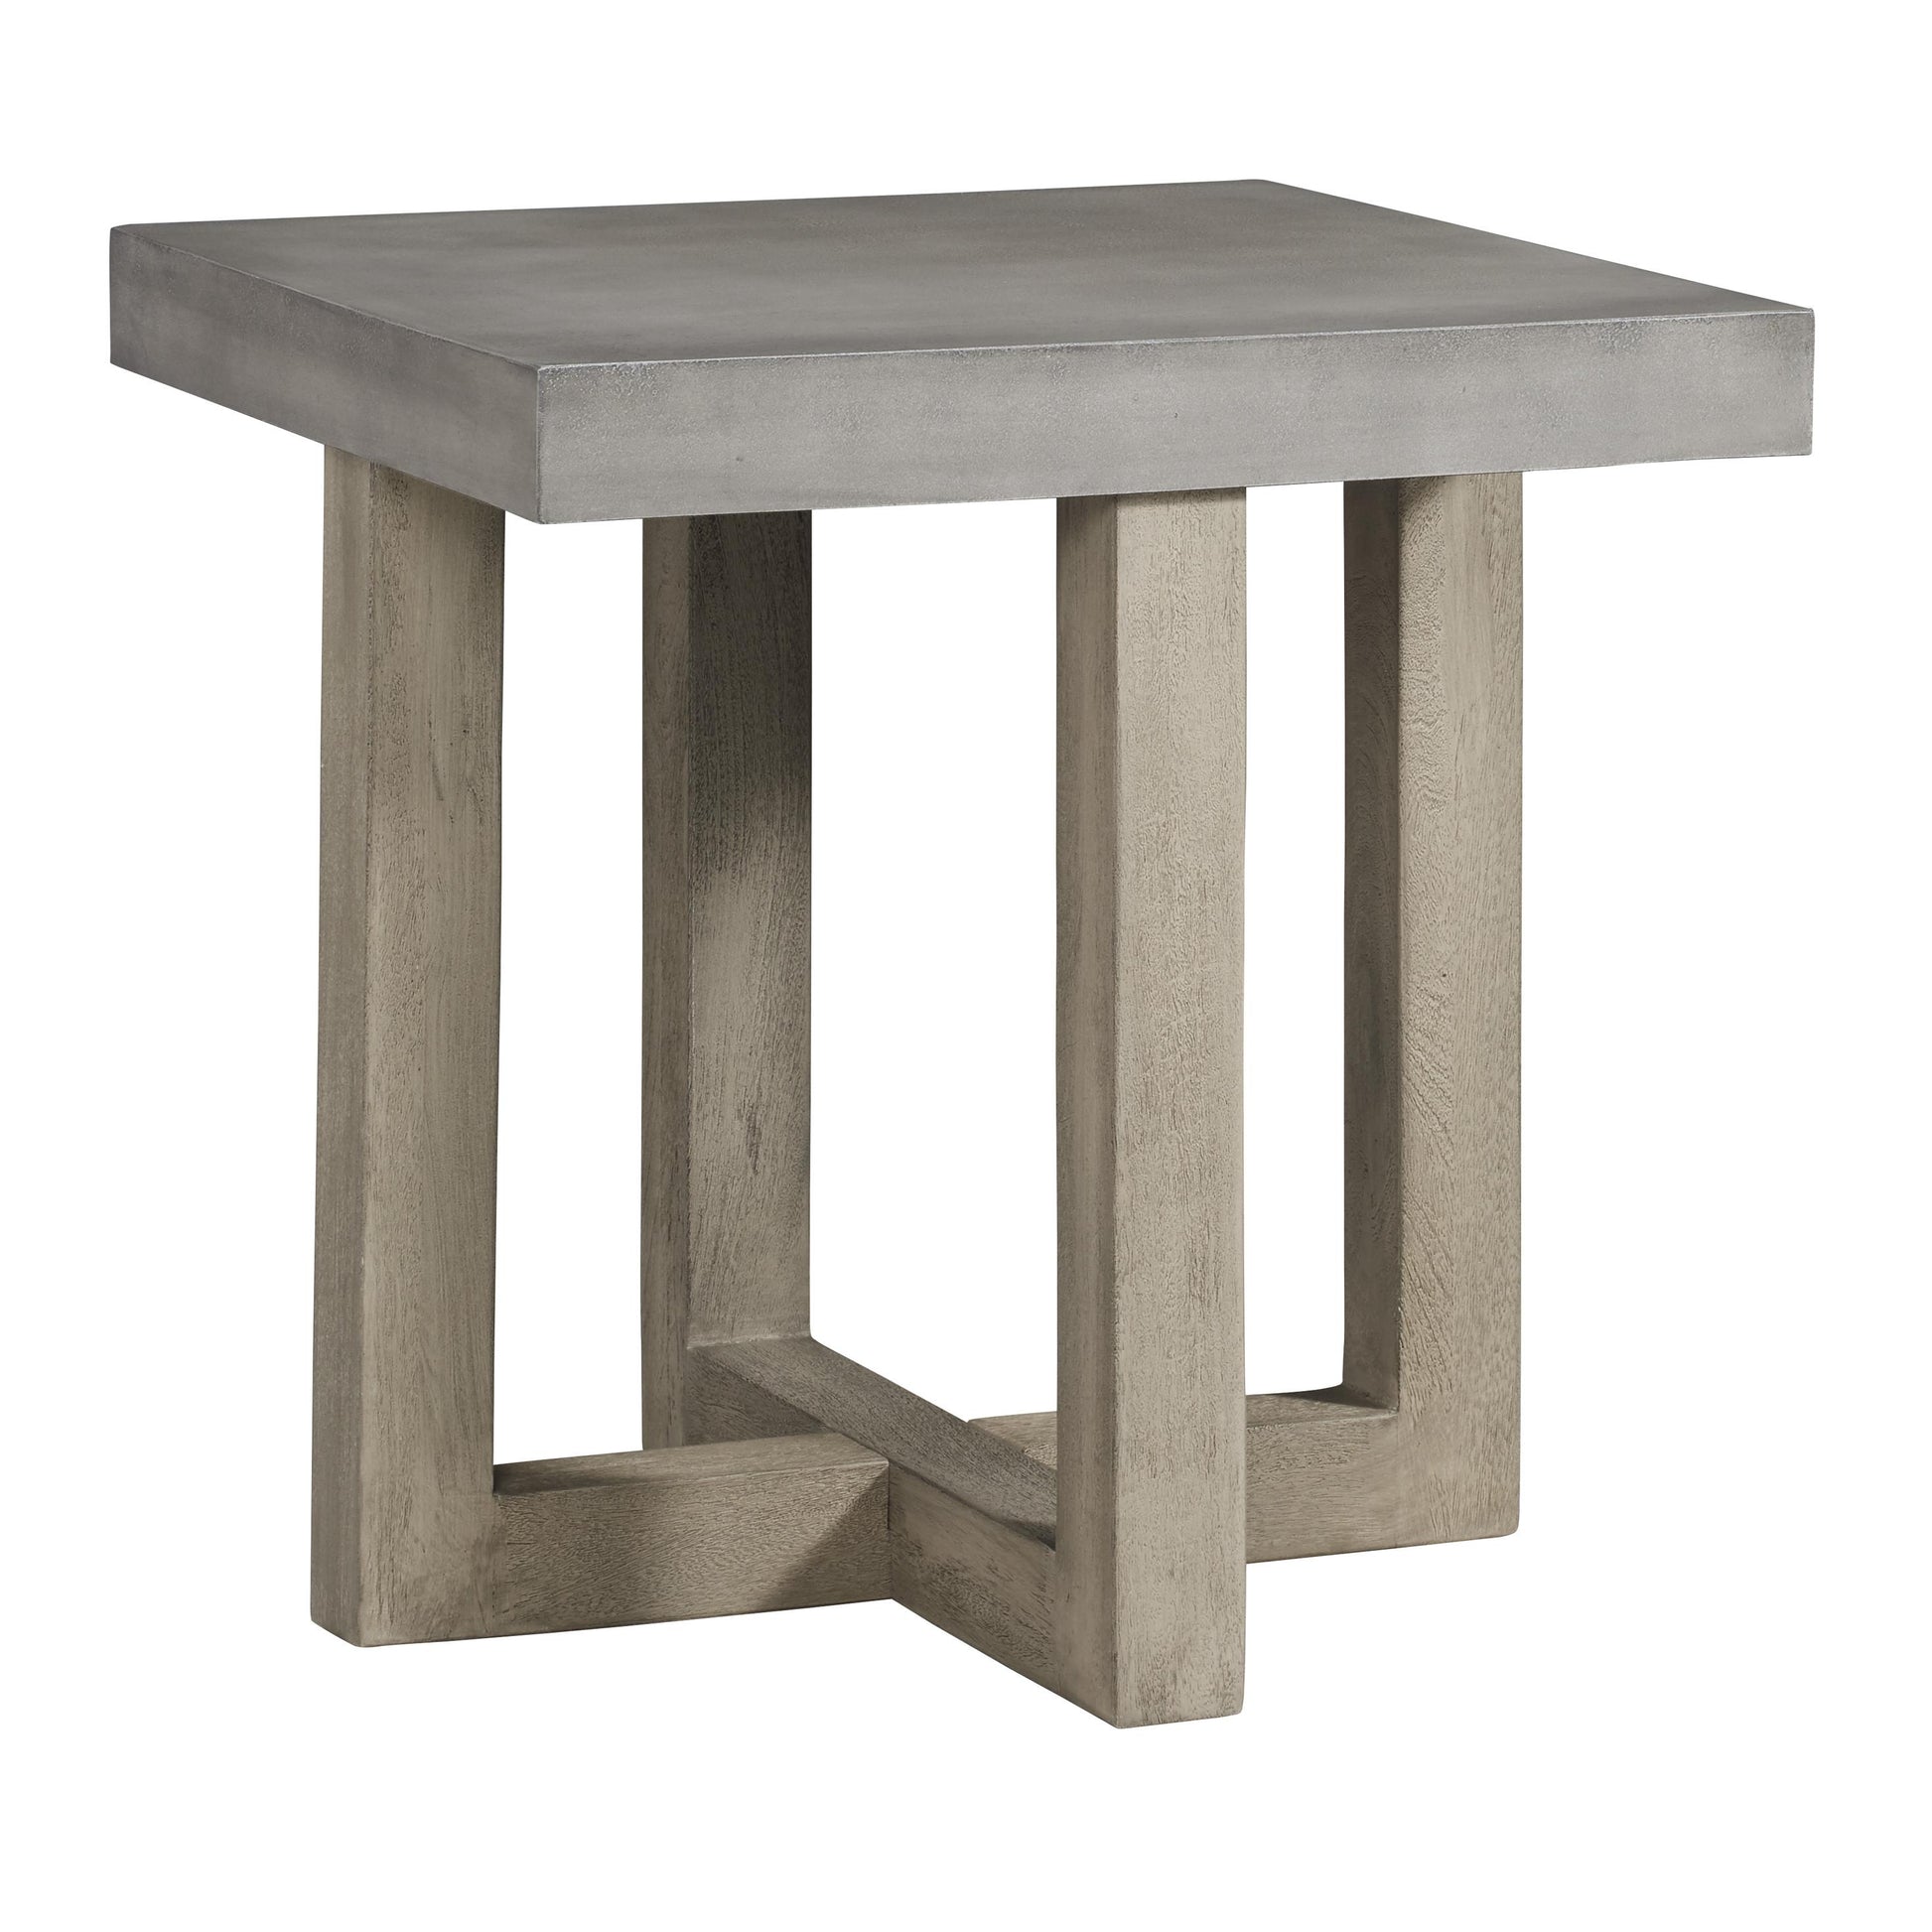 Signature Design by Ashley Lockthorne End Table T988-2 IMAGE 1